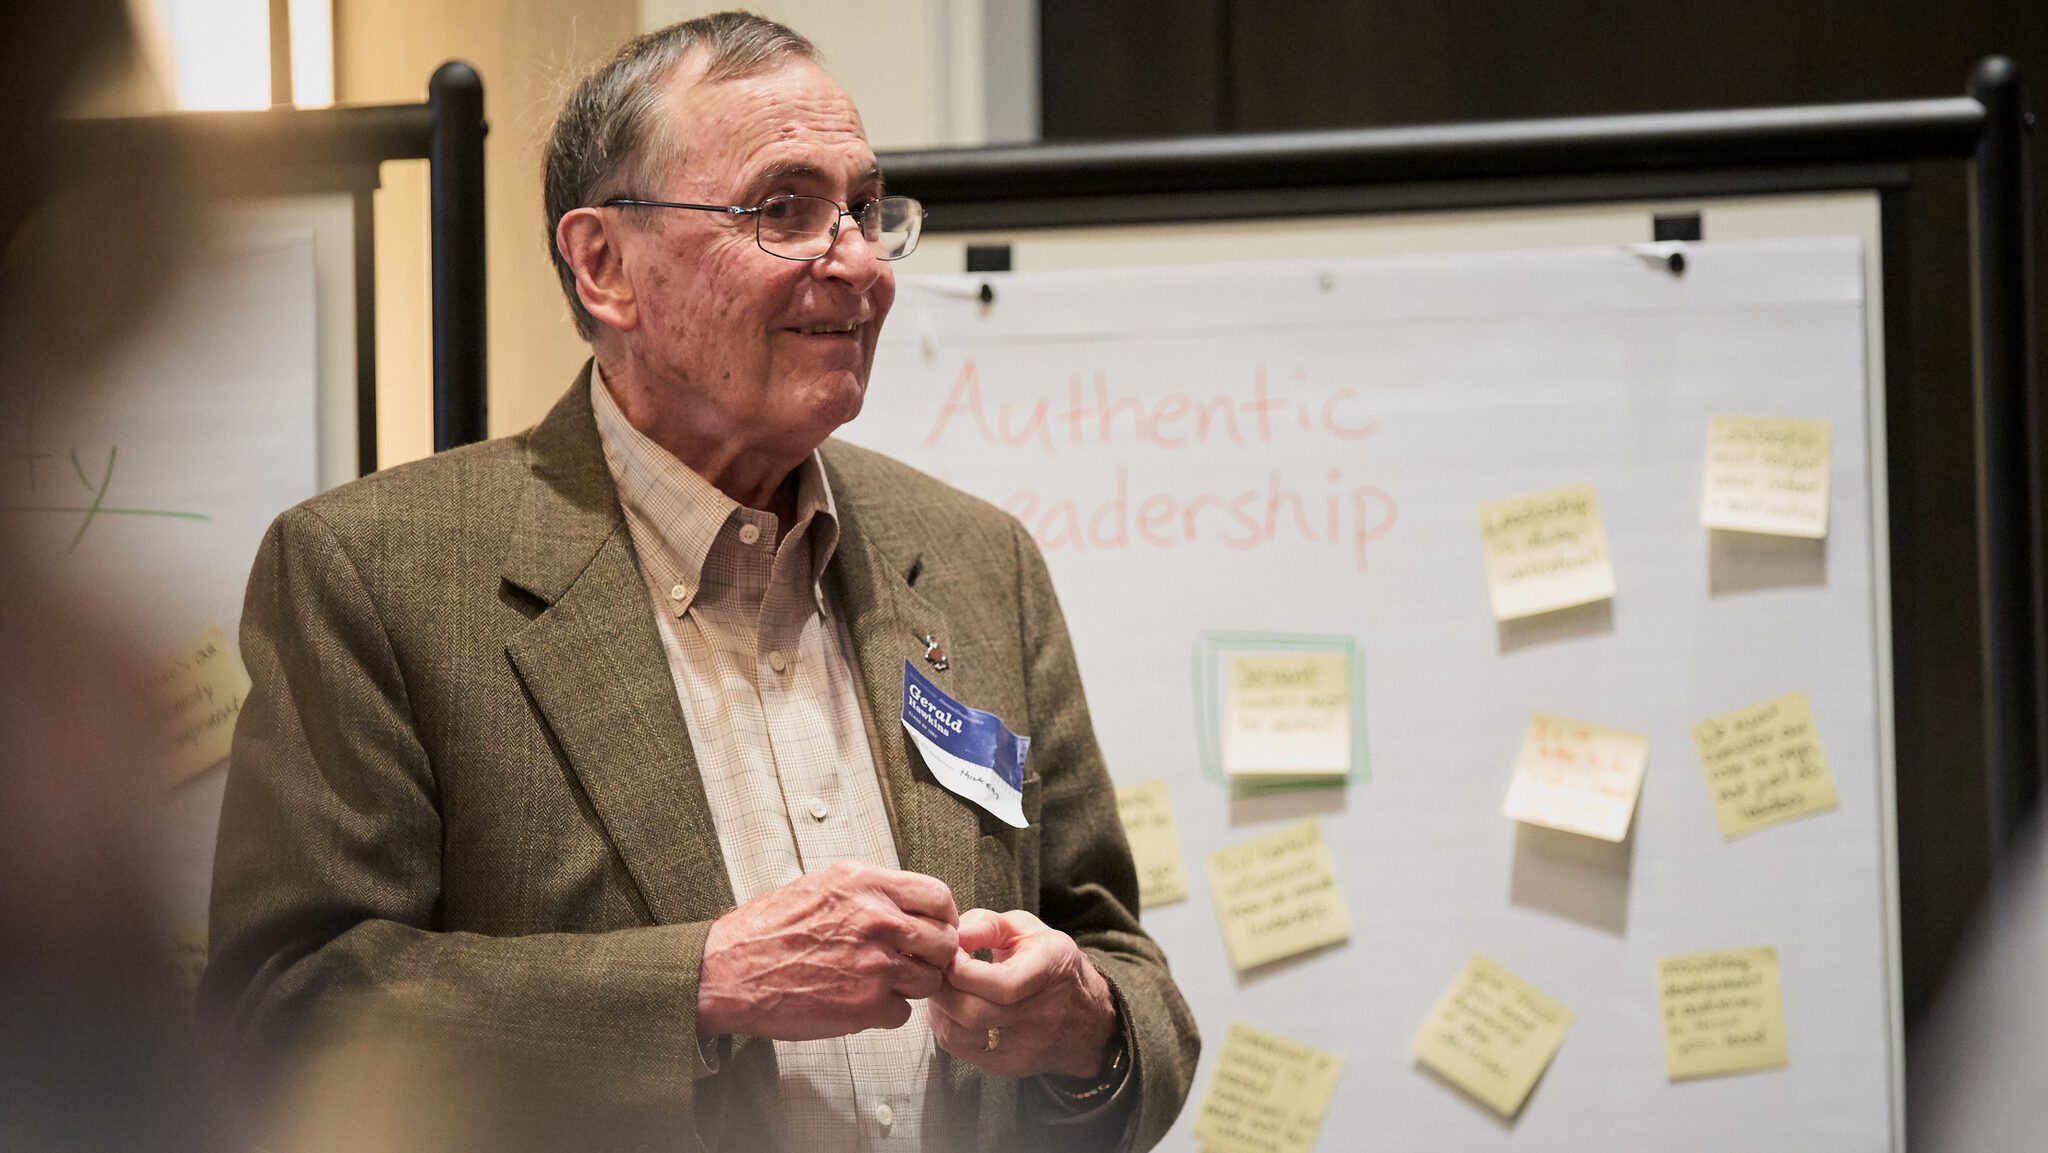 Dr. Gerald Hawkins standing in front of a whiteboard that says authentic leadership